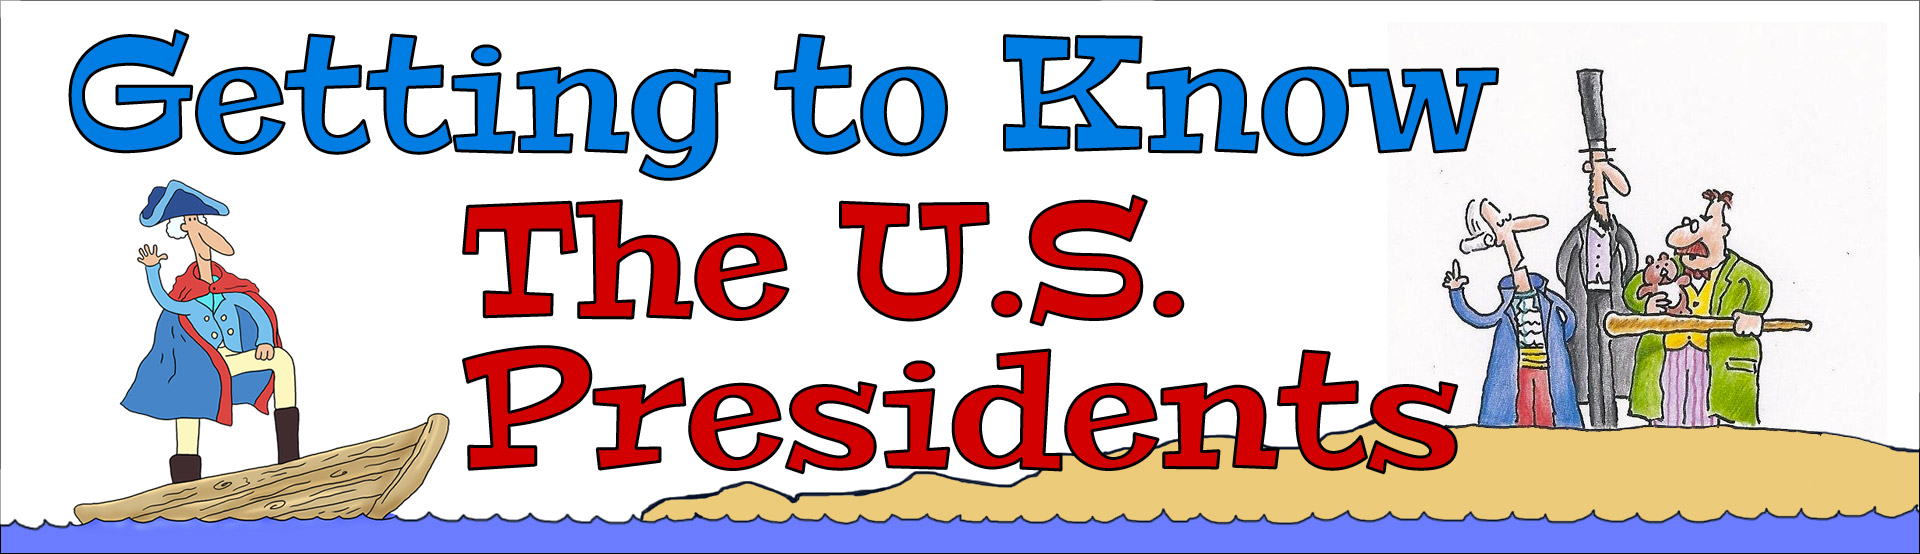 Getting To Know The U.S. Presidents